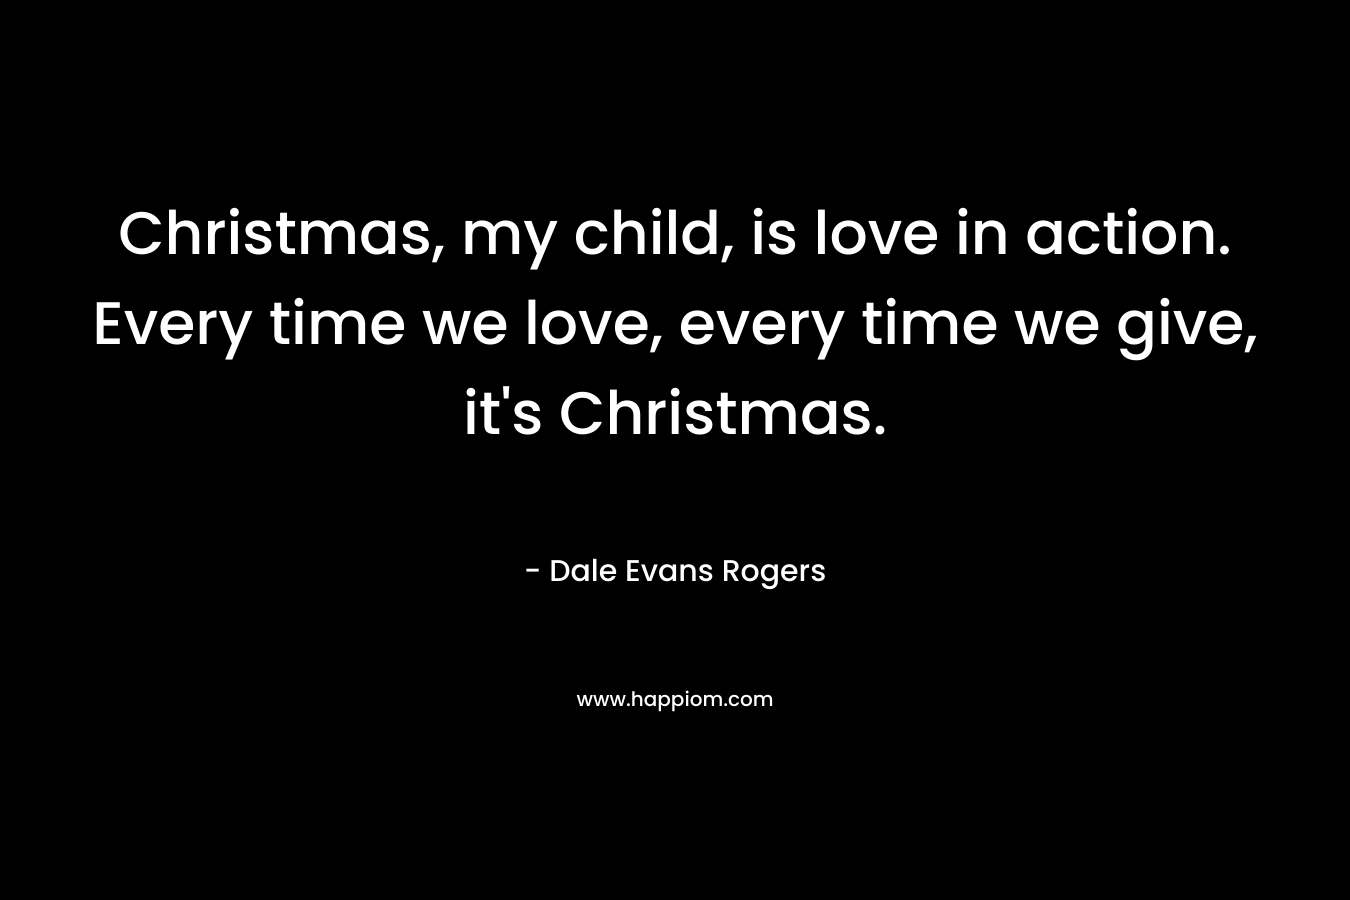 Christmas, my child, is love in action. Every time we love, every time we give, it's Christmas.